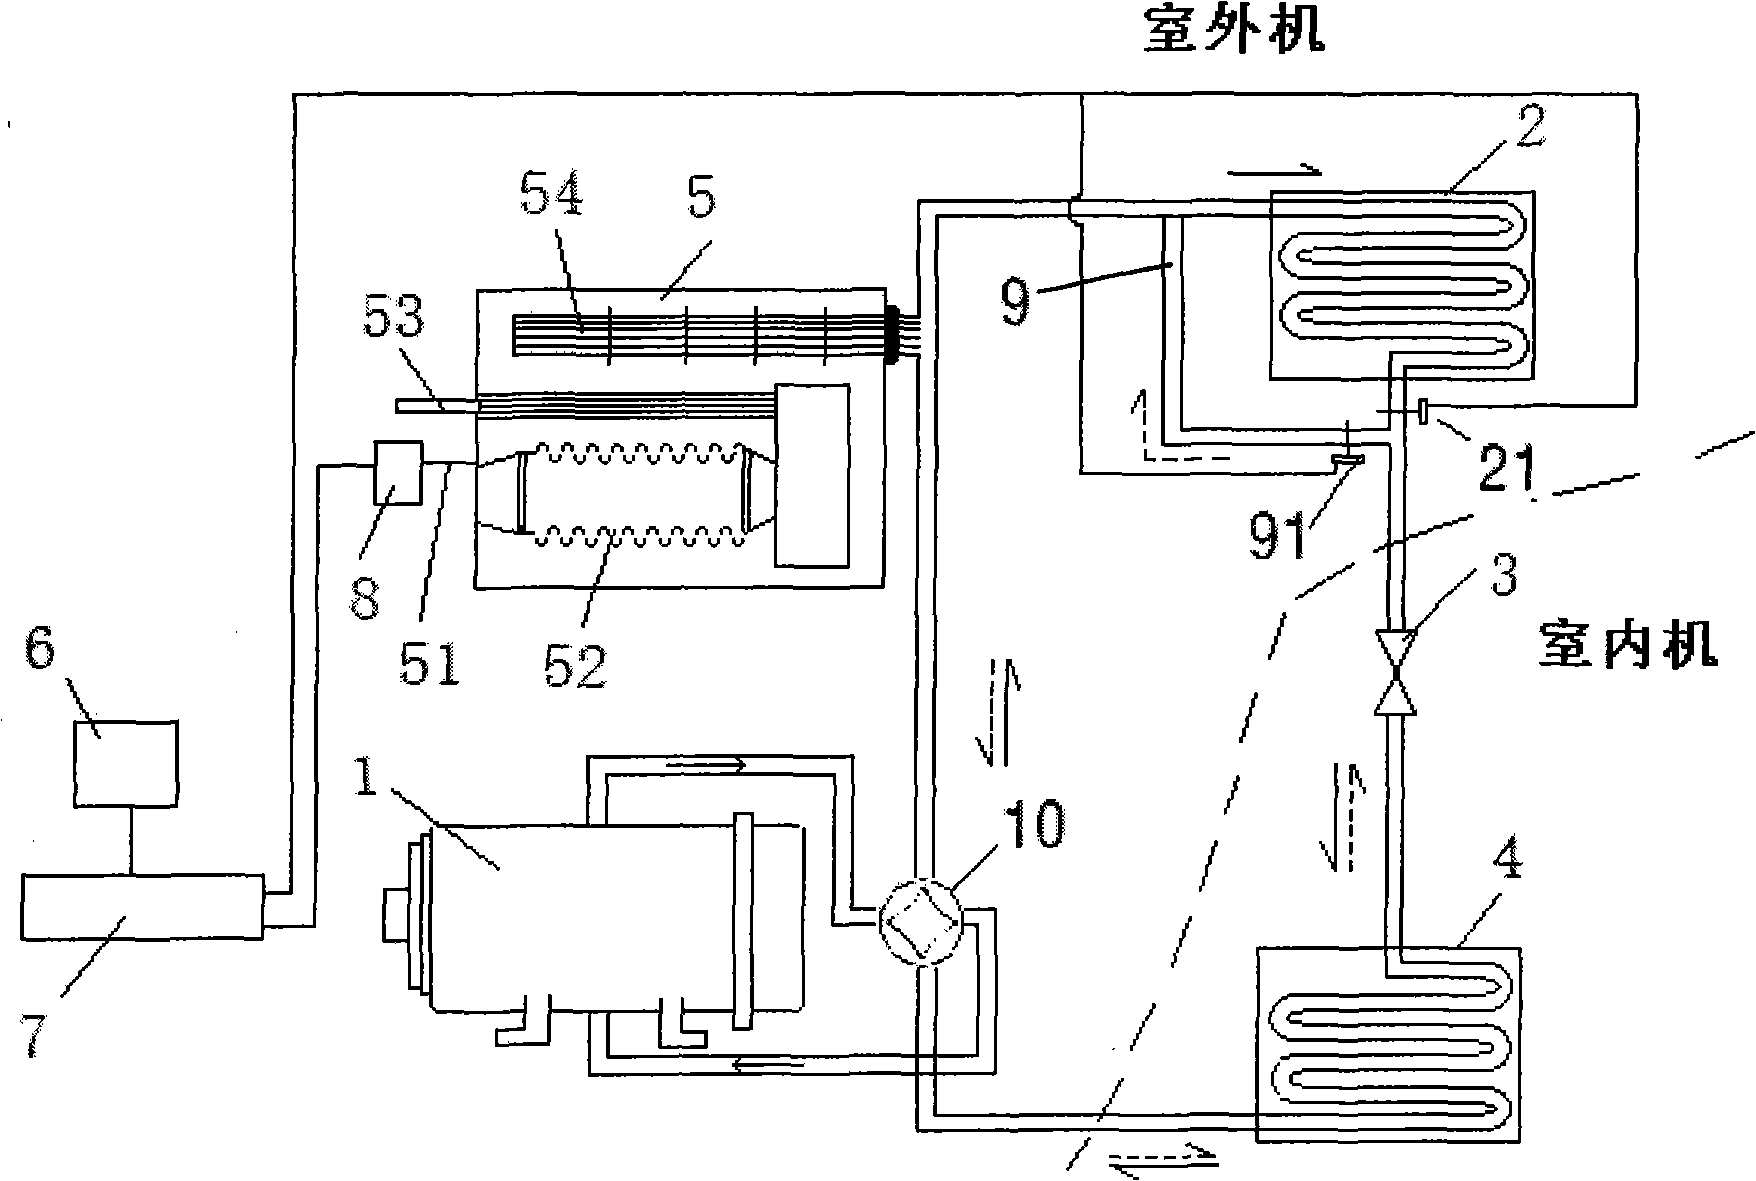 Dual-energy gas heat pump air-conditioning system for refrigeration and heating and operating method thereof